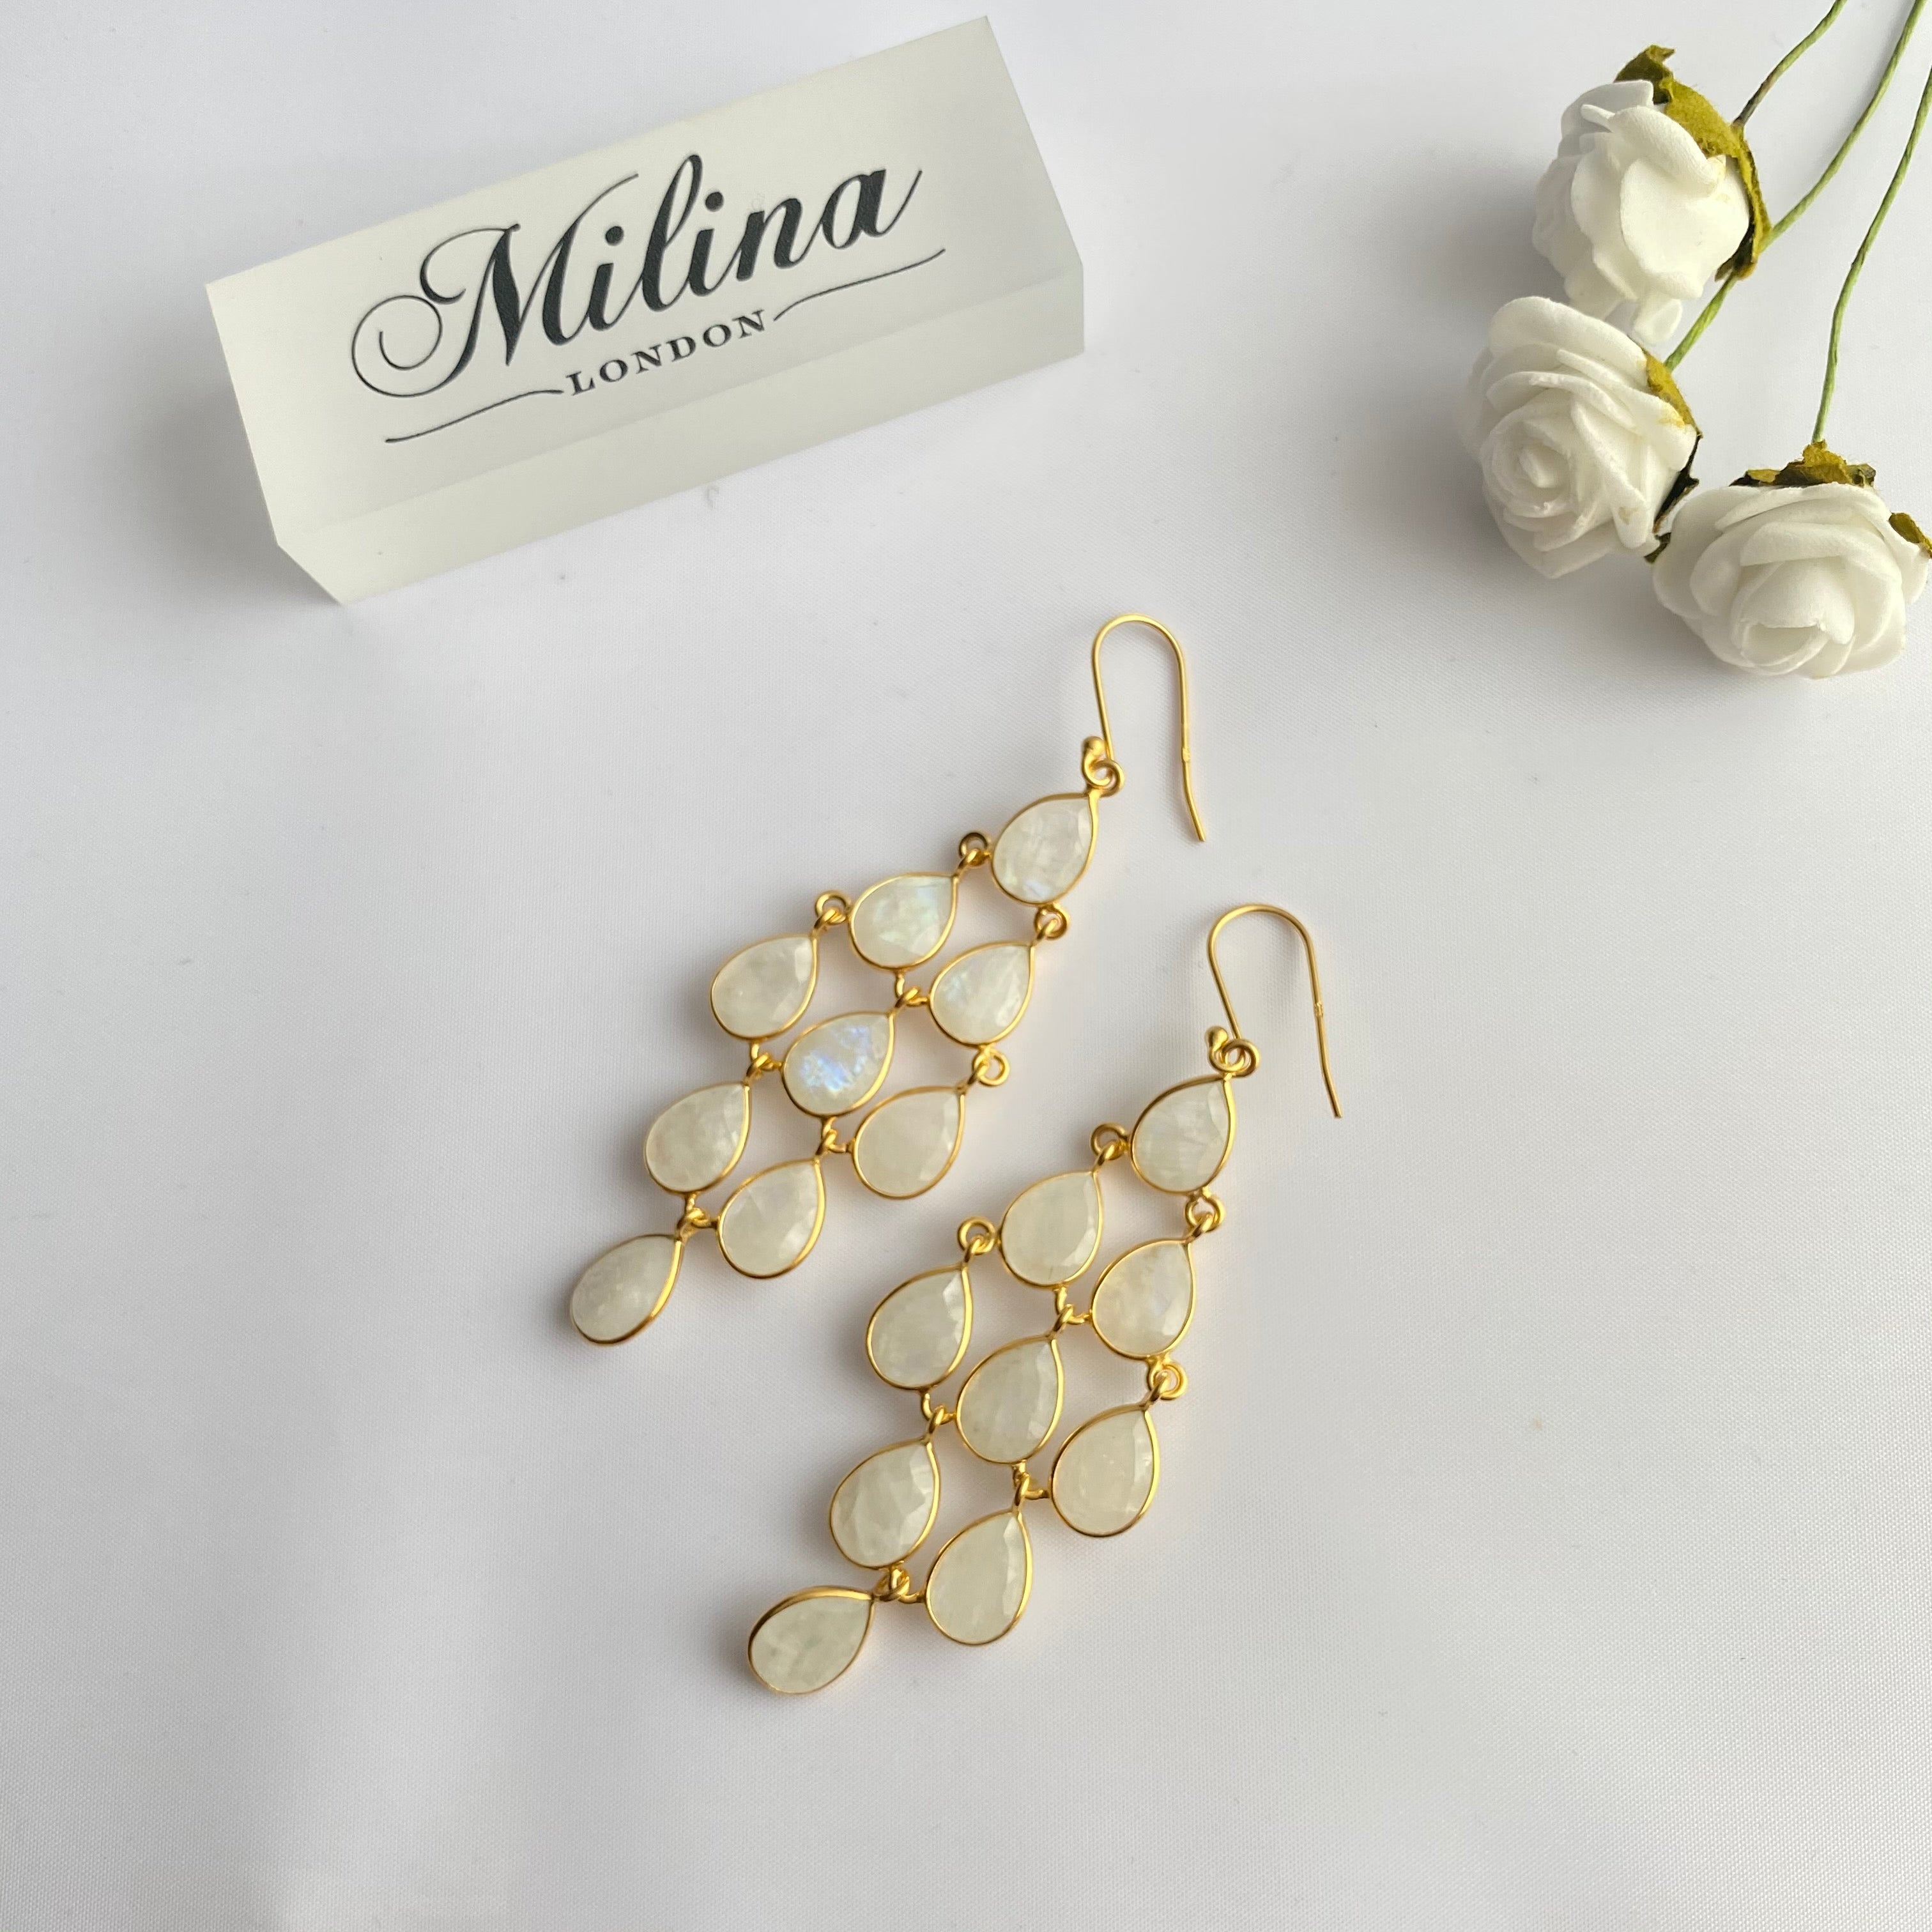 Gold Plated Sterling Silver Chandelier Earrings with Natural Gemstones  - Moonstone